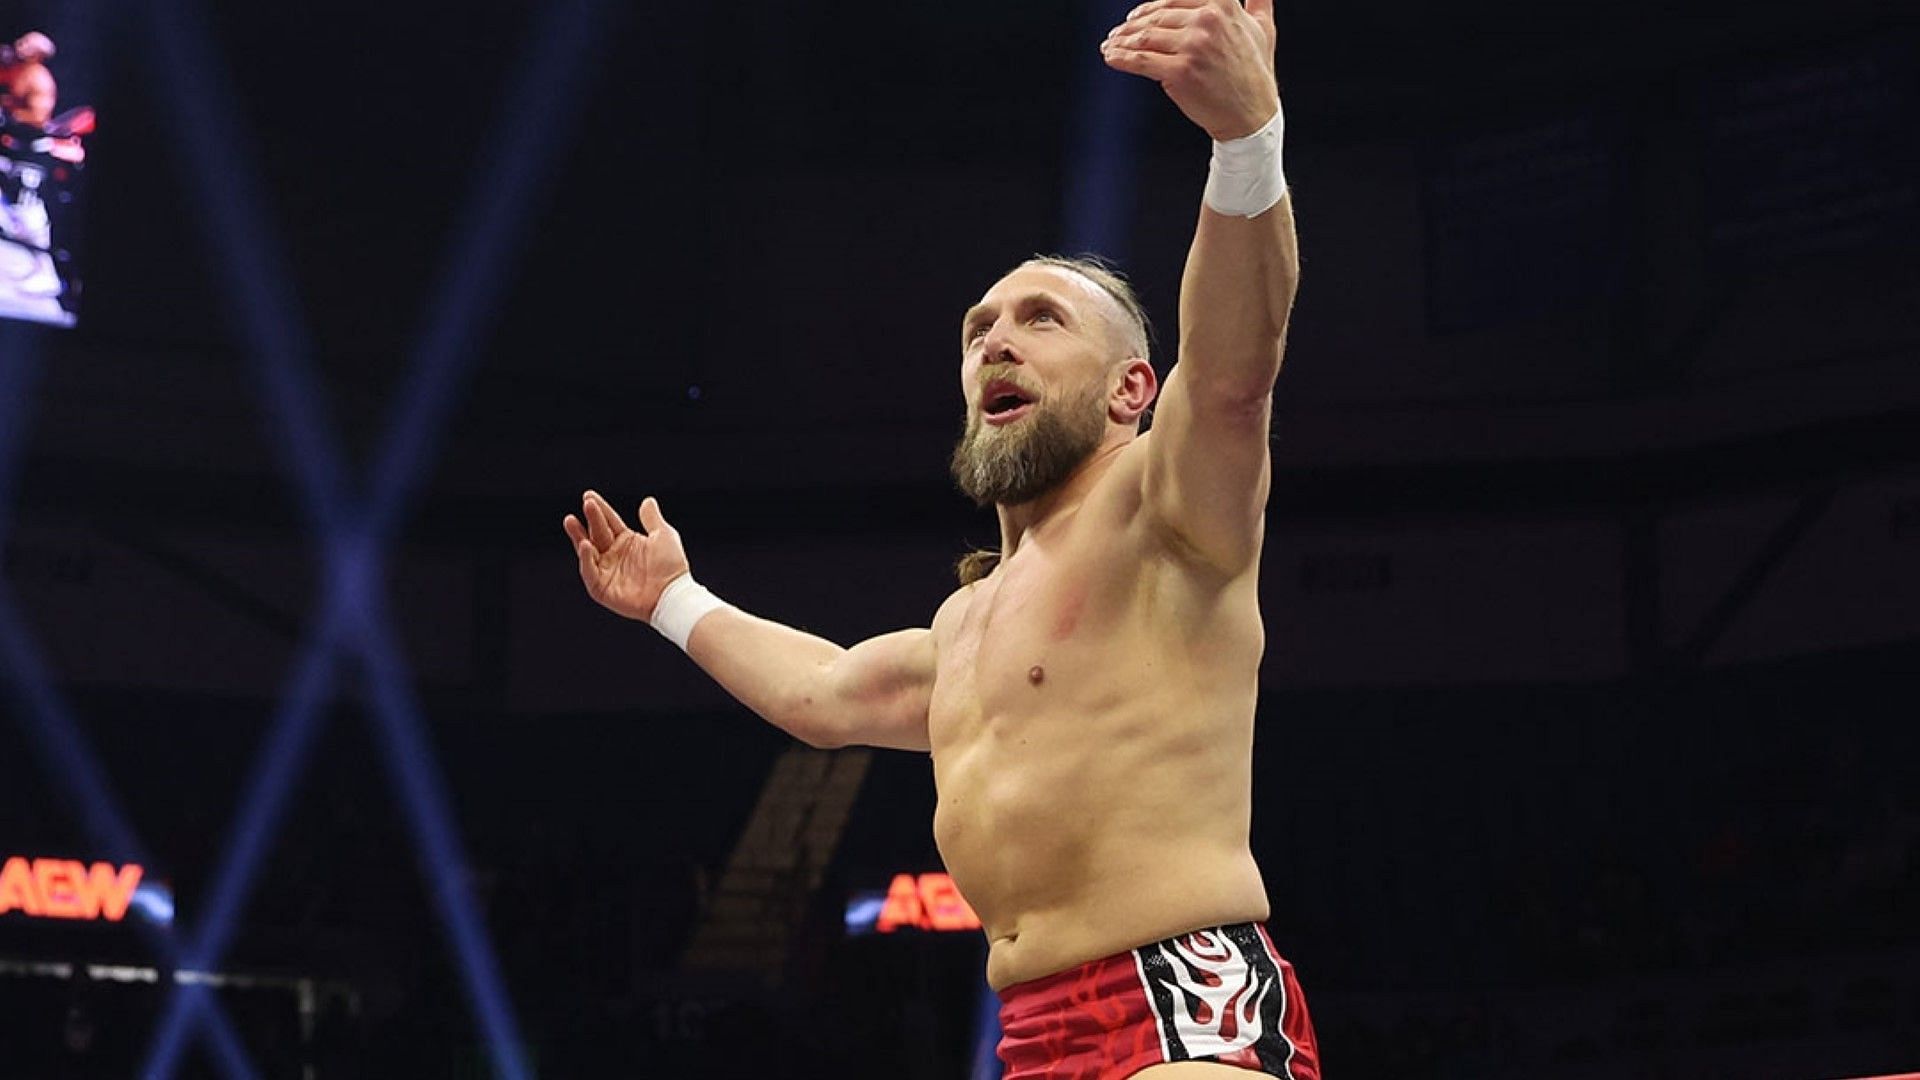 Bryan Danielson stands tall on AEW Collision